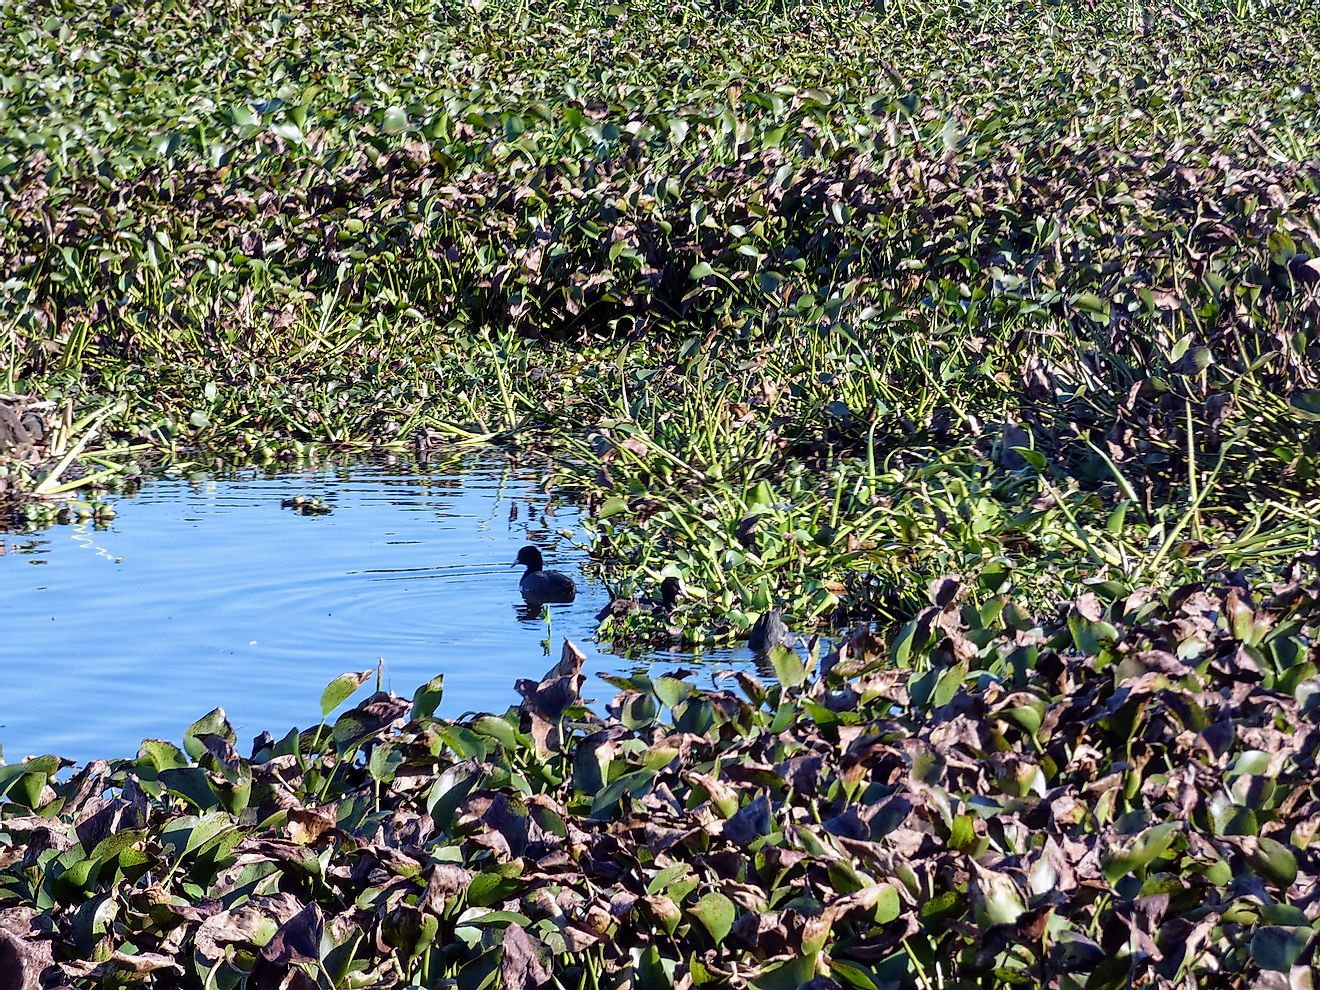 Eichhornia or water hyacinth suffocating a water body in Portugal. Image credit: Ana Couto/Shutterstock.com